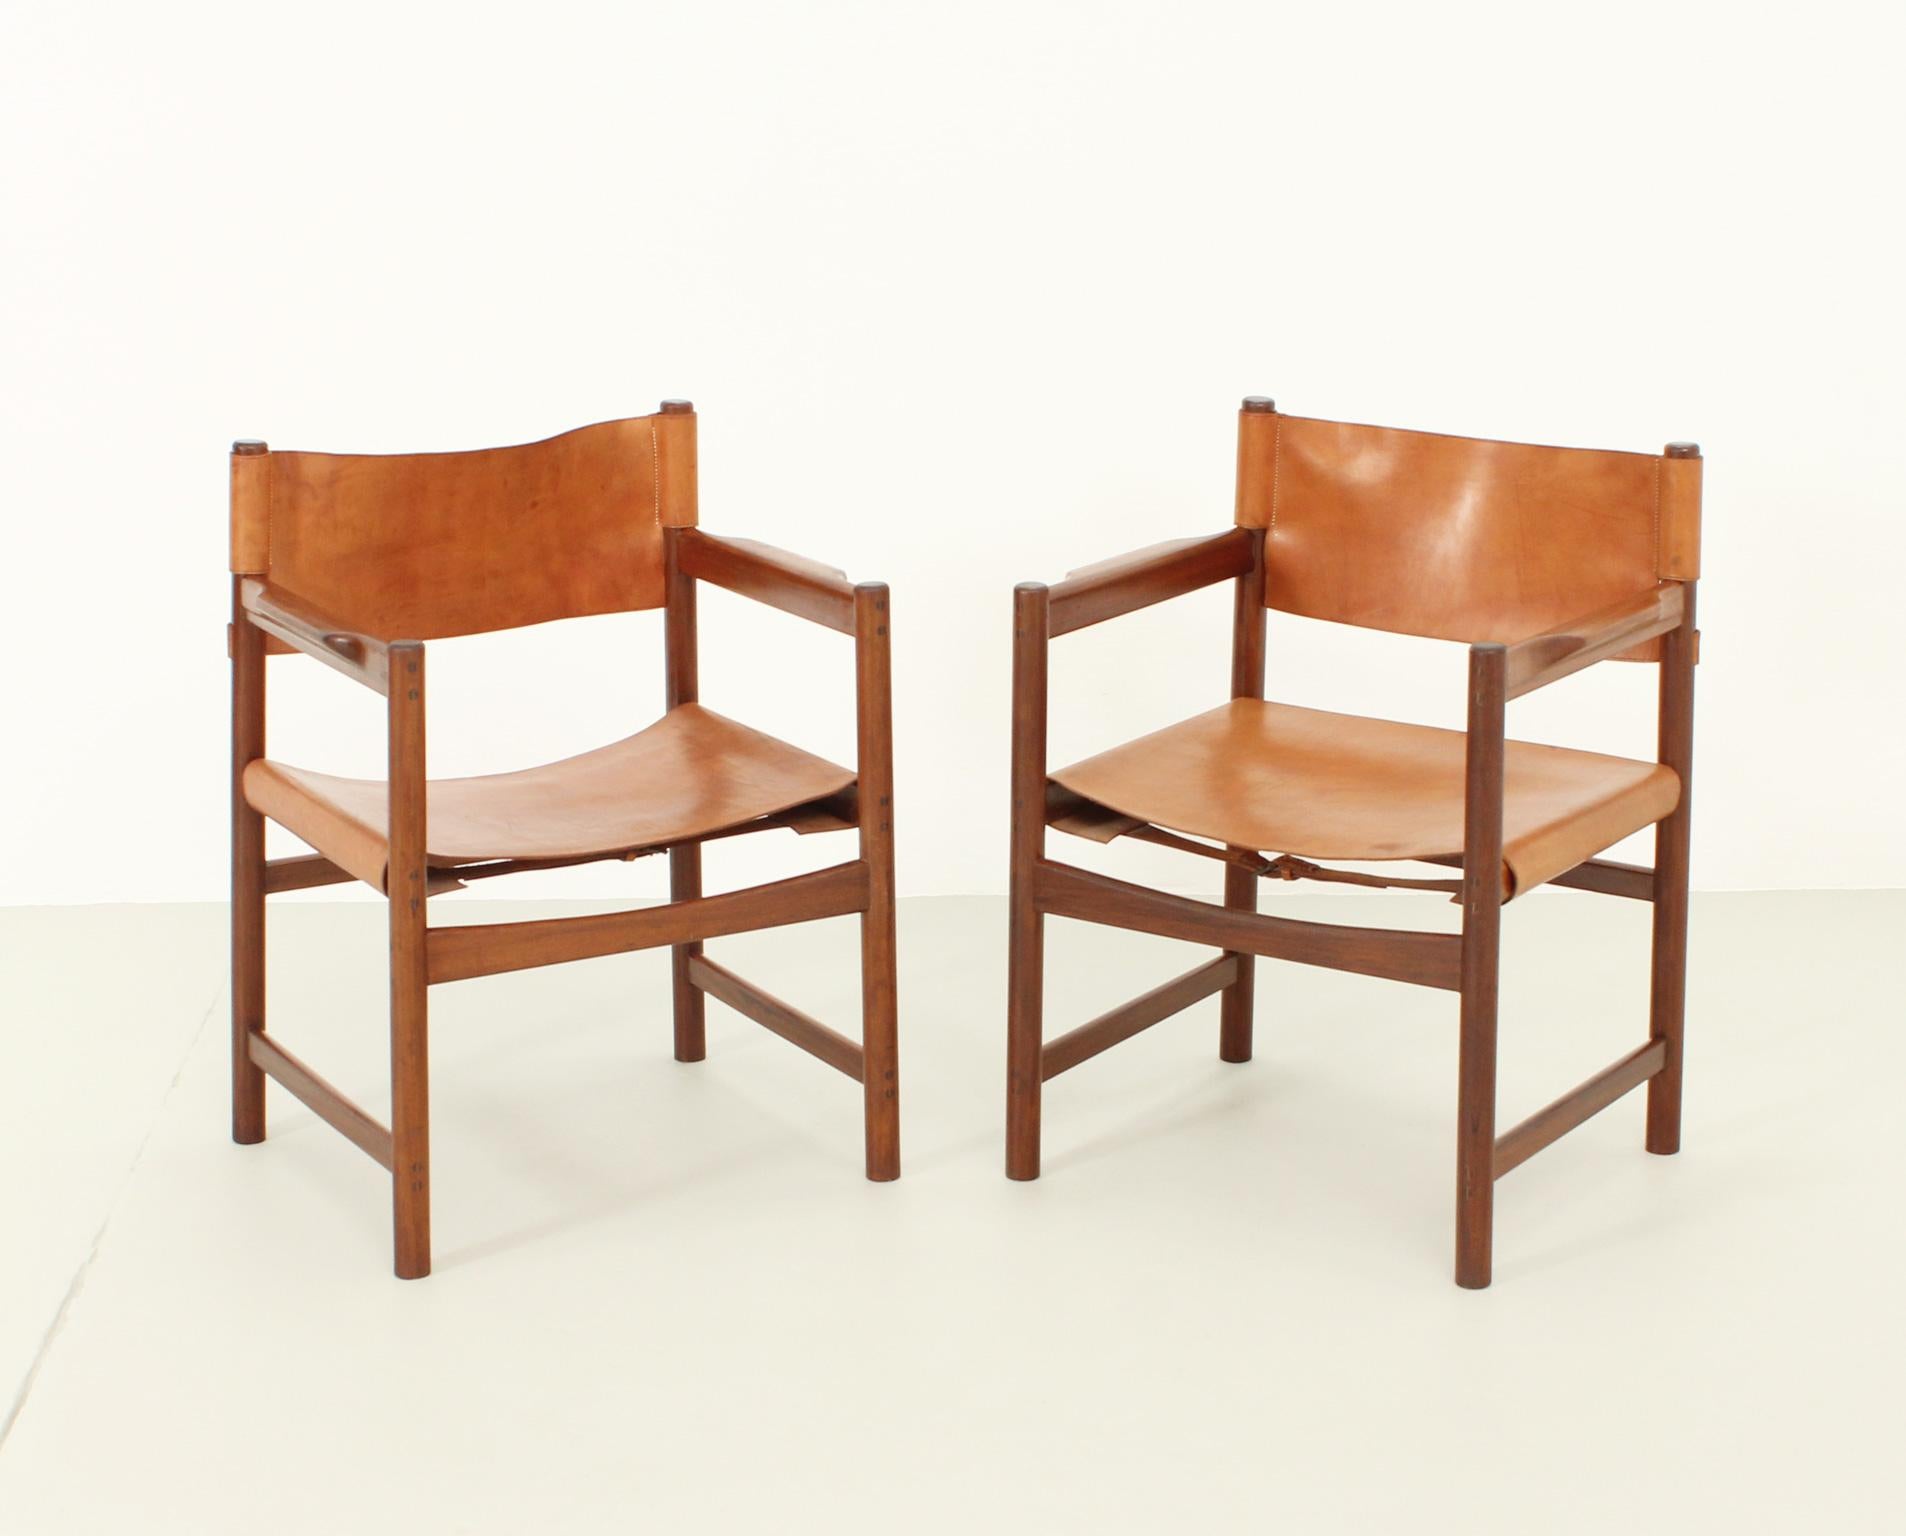 Pair of Spanish chairs by unknown designer in the manner of borge mogensen, Spain, 1960's. Mahogany wood structure and thick cognac leather.